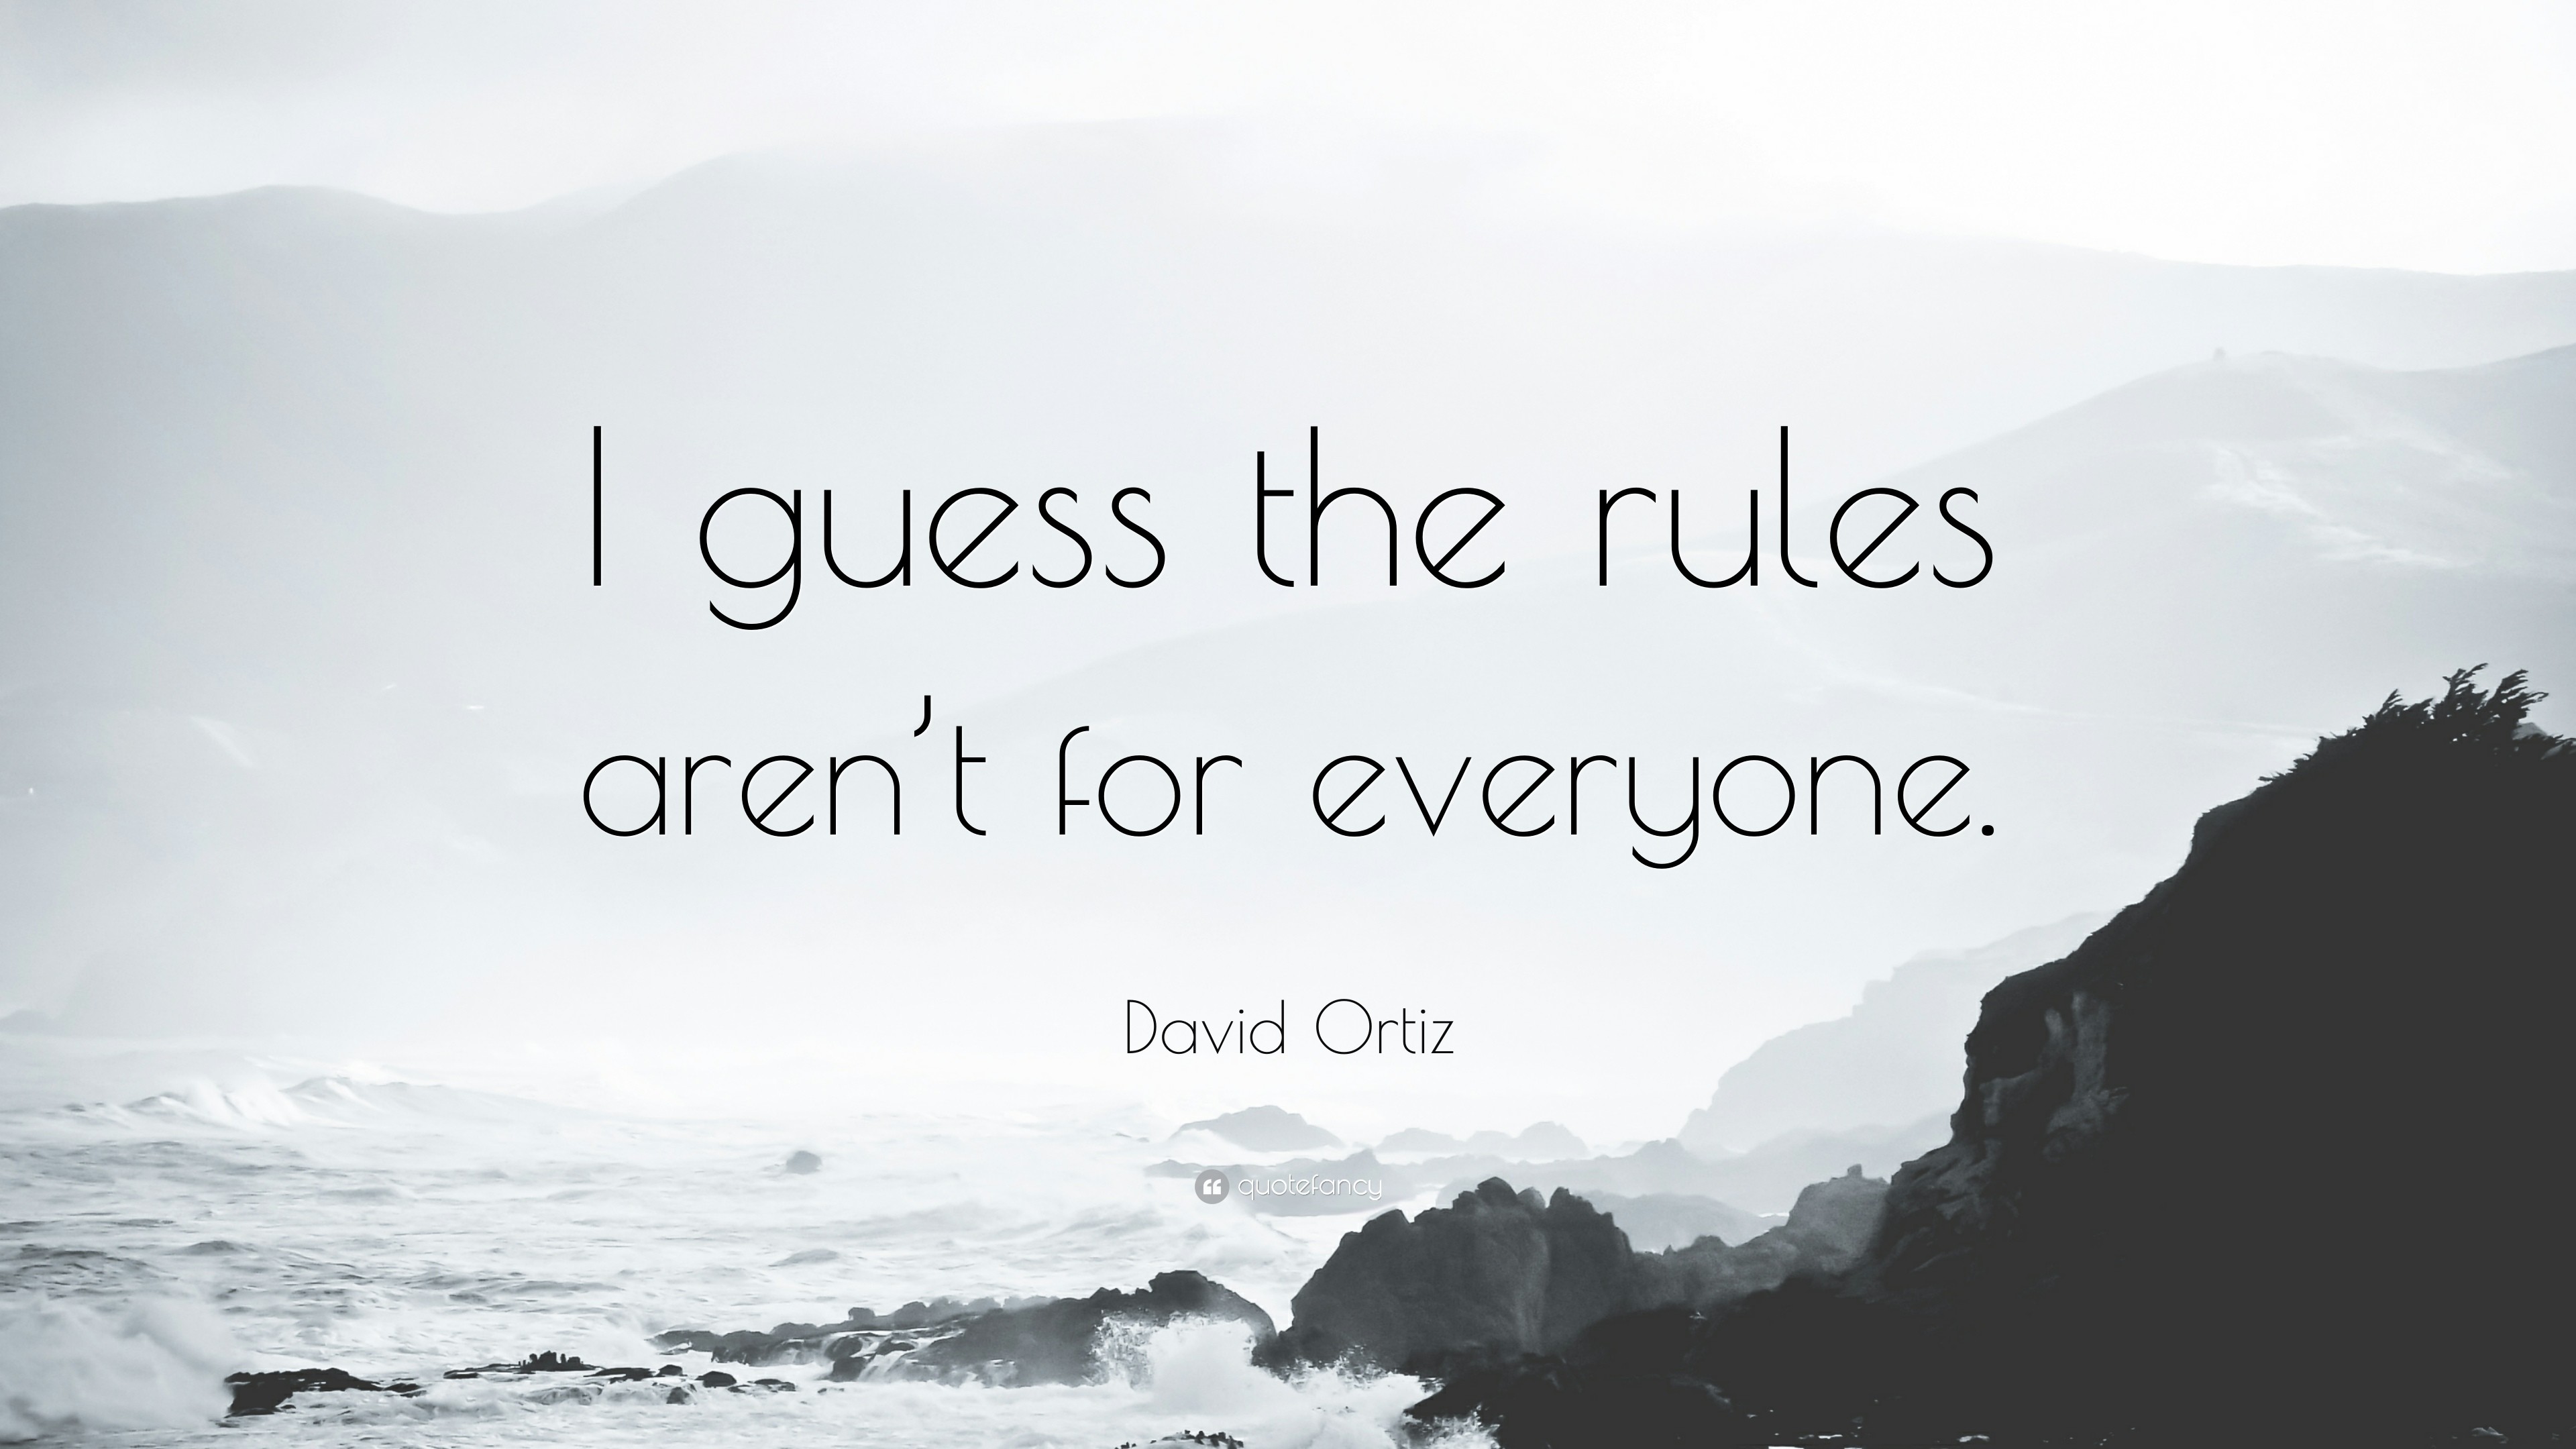 3840x2160 David Ortiz Quote: “I guess the rules aren't for everyone.”